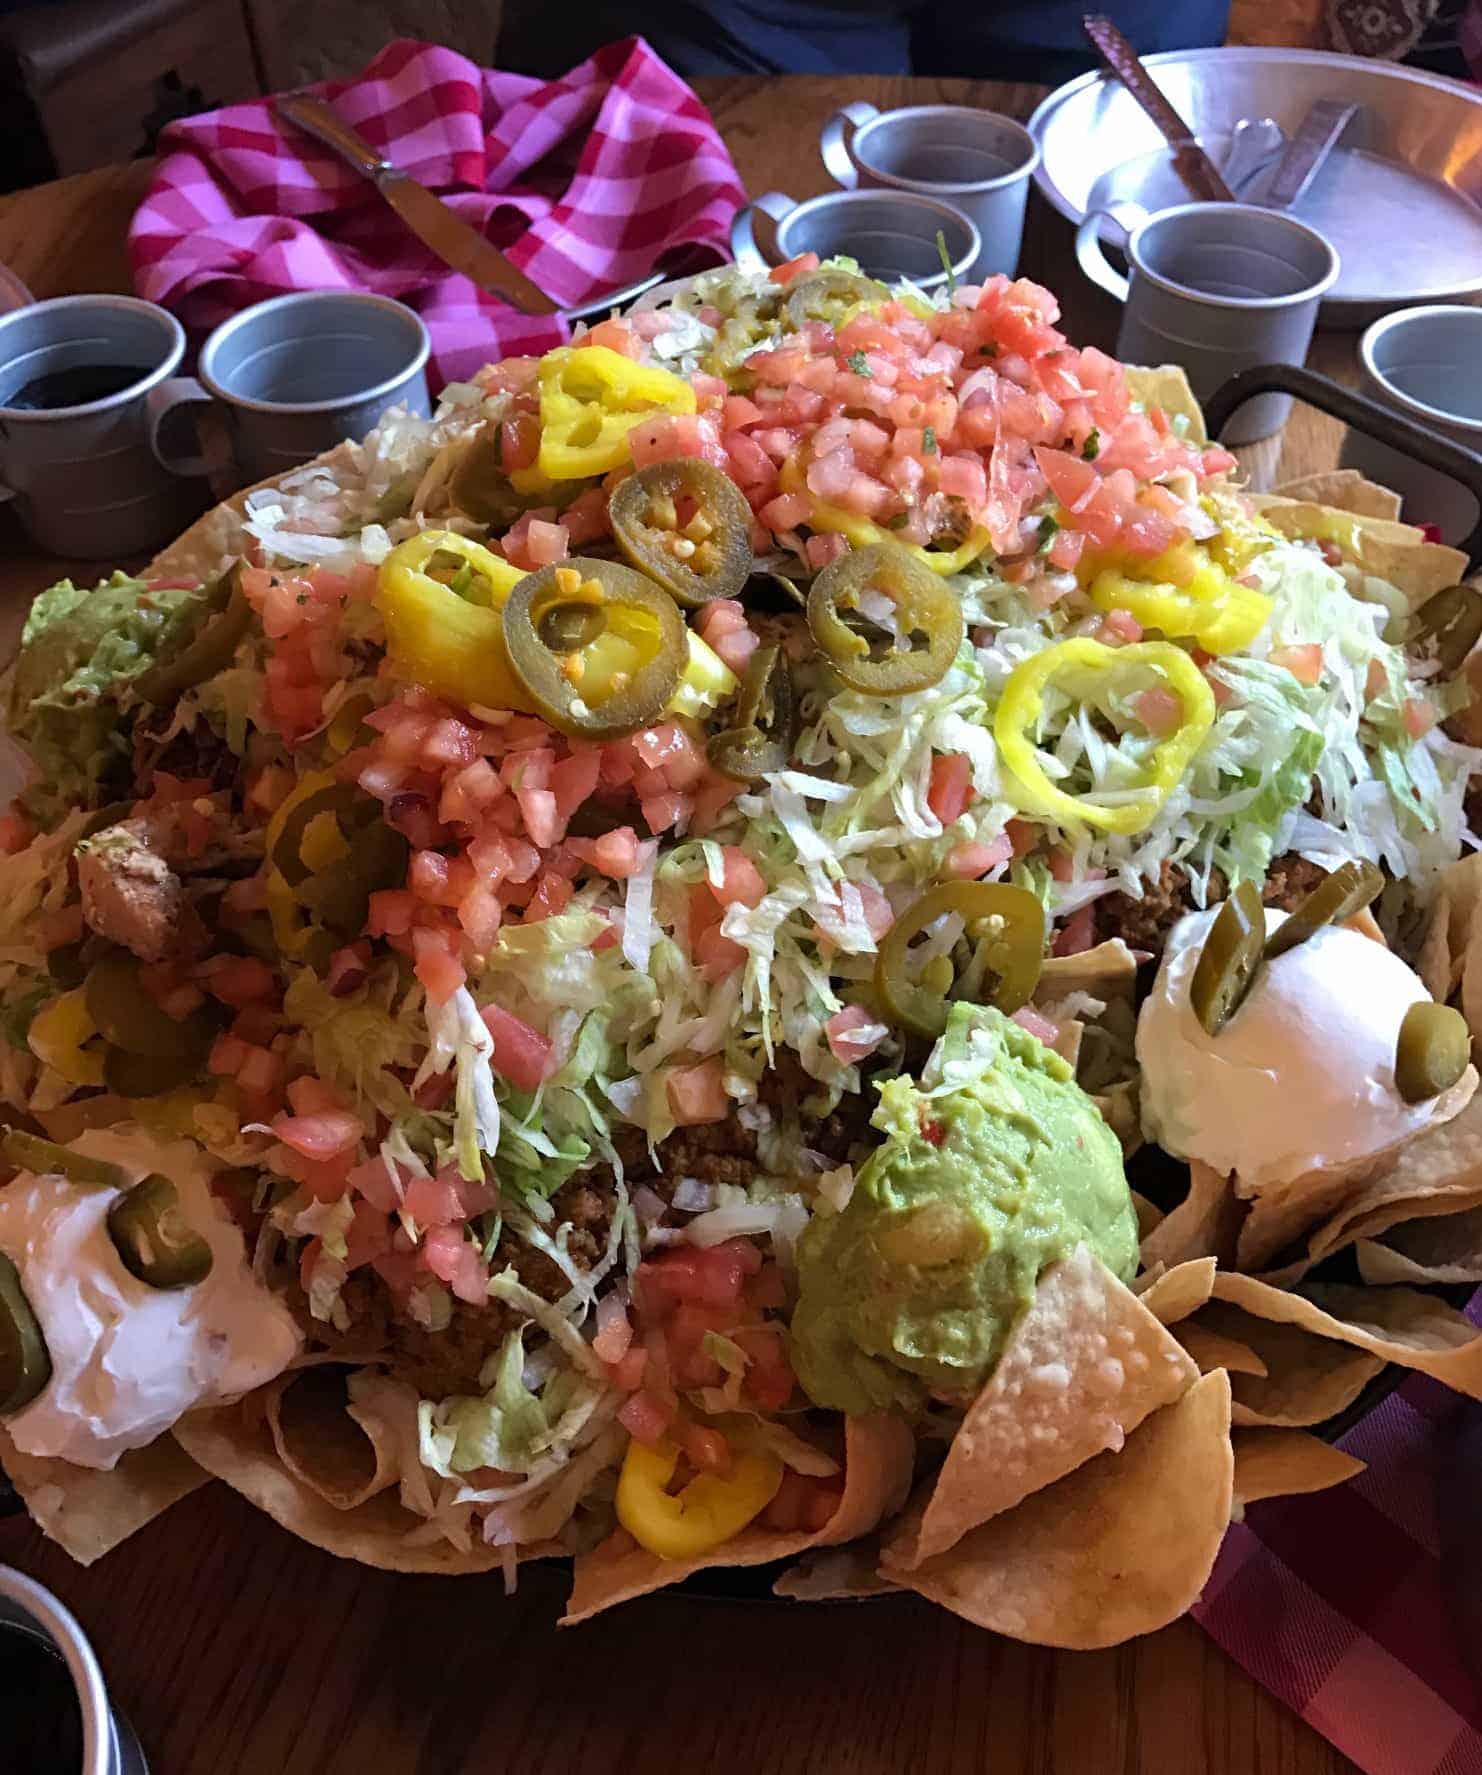 If you have a large party, don't forget to try the Secret Disney Nachos at Pecos Bill in Magic Kingdom Park!